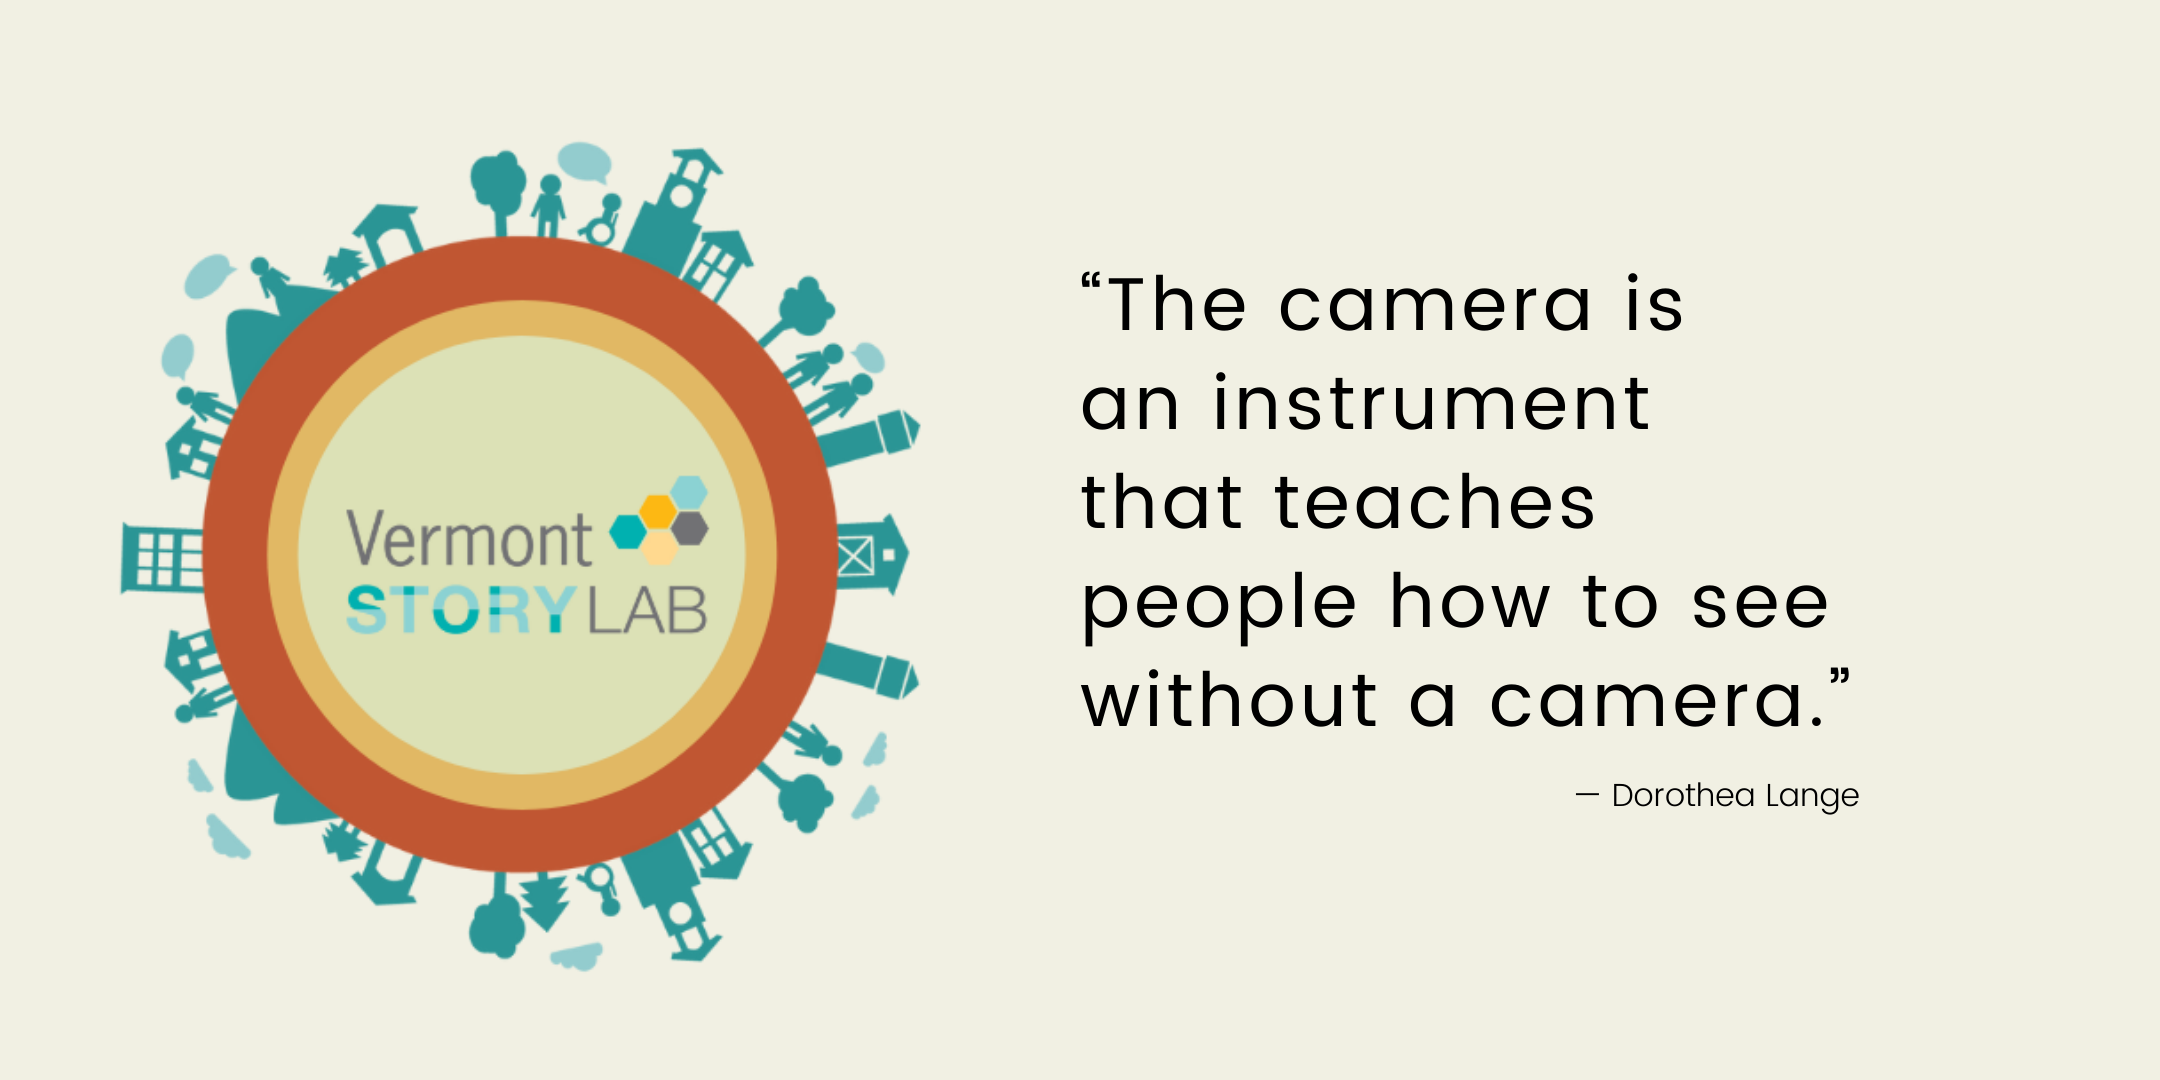 Quote: "The camera is an instrument that teaches how to see without a camera." -- Dorothea Lange